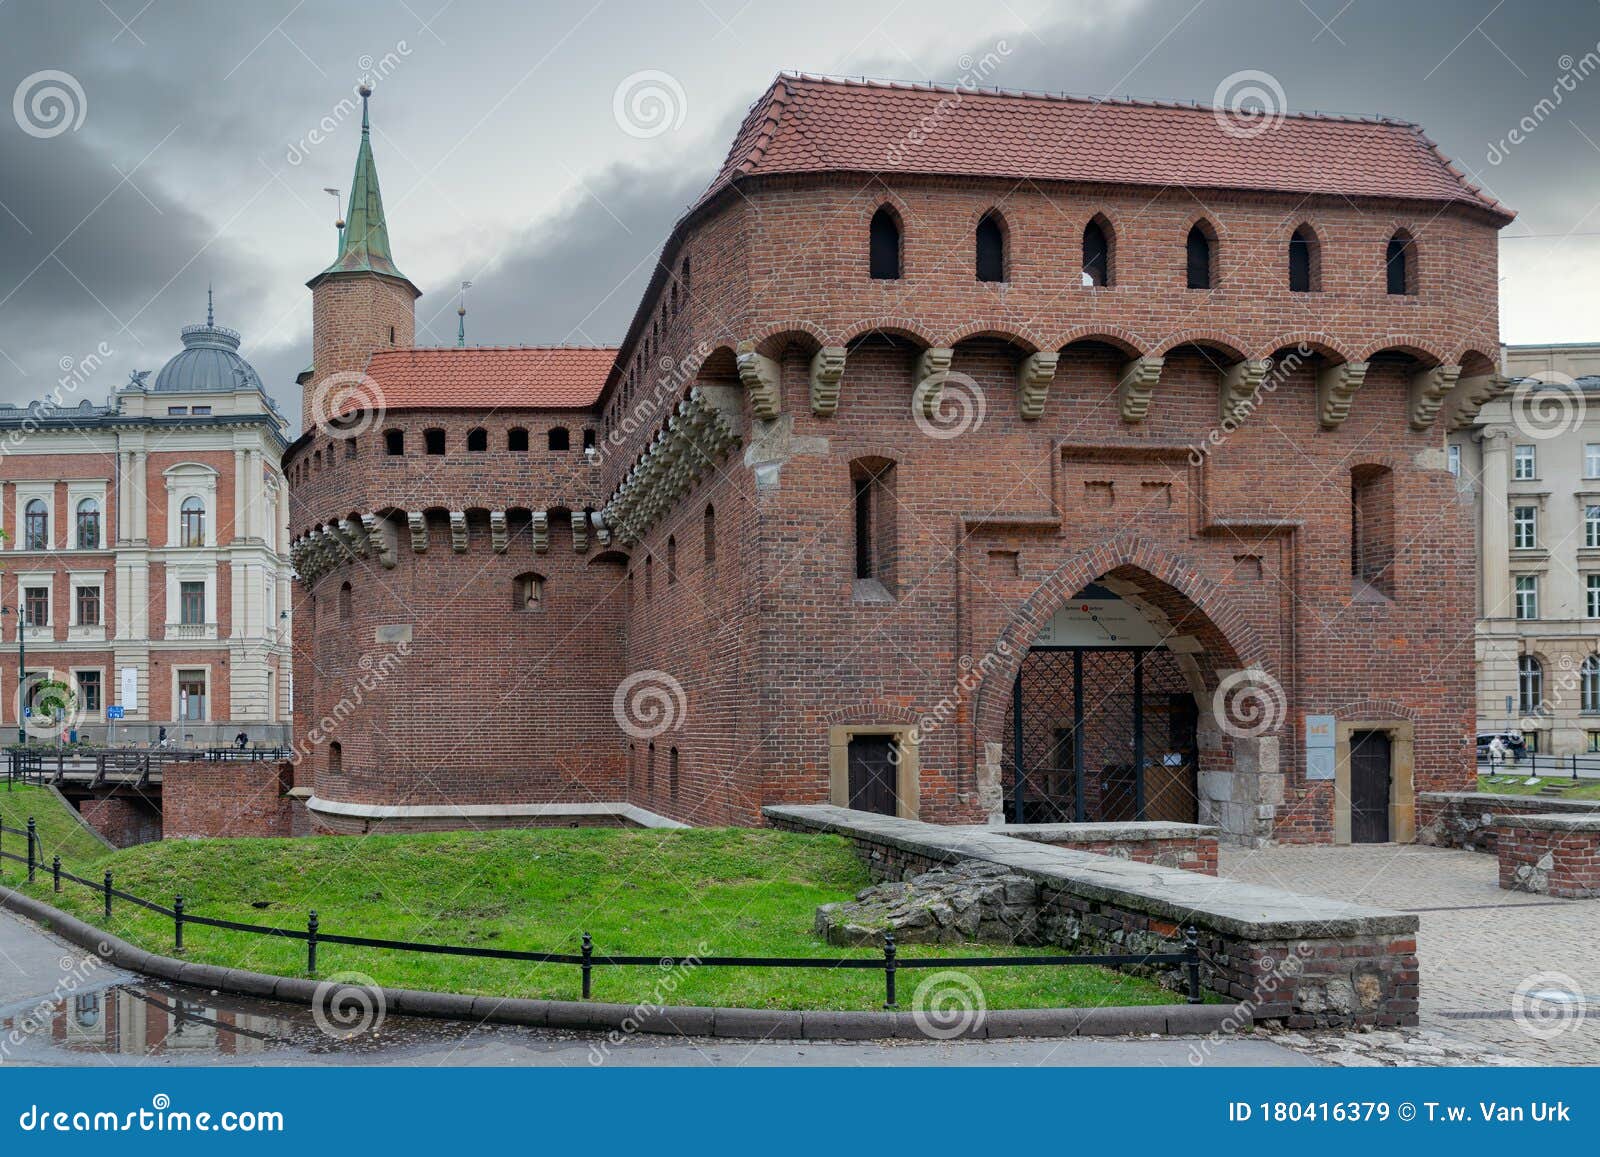 kracow barbican, medieval fortifcation old town of krakow, poland